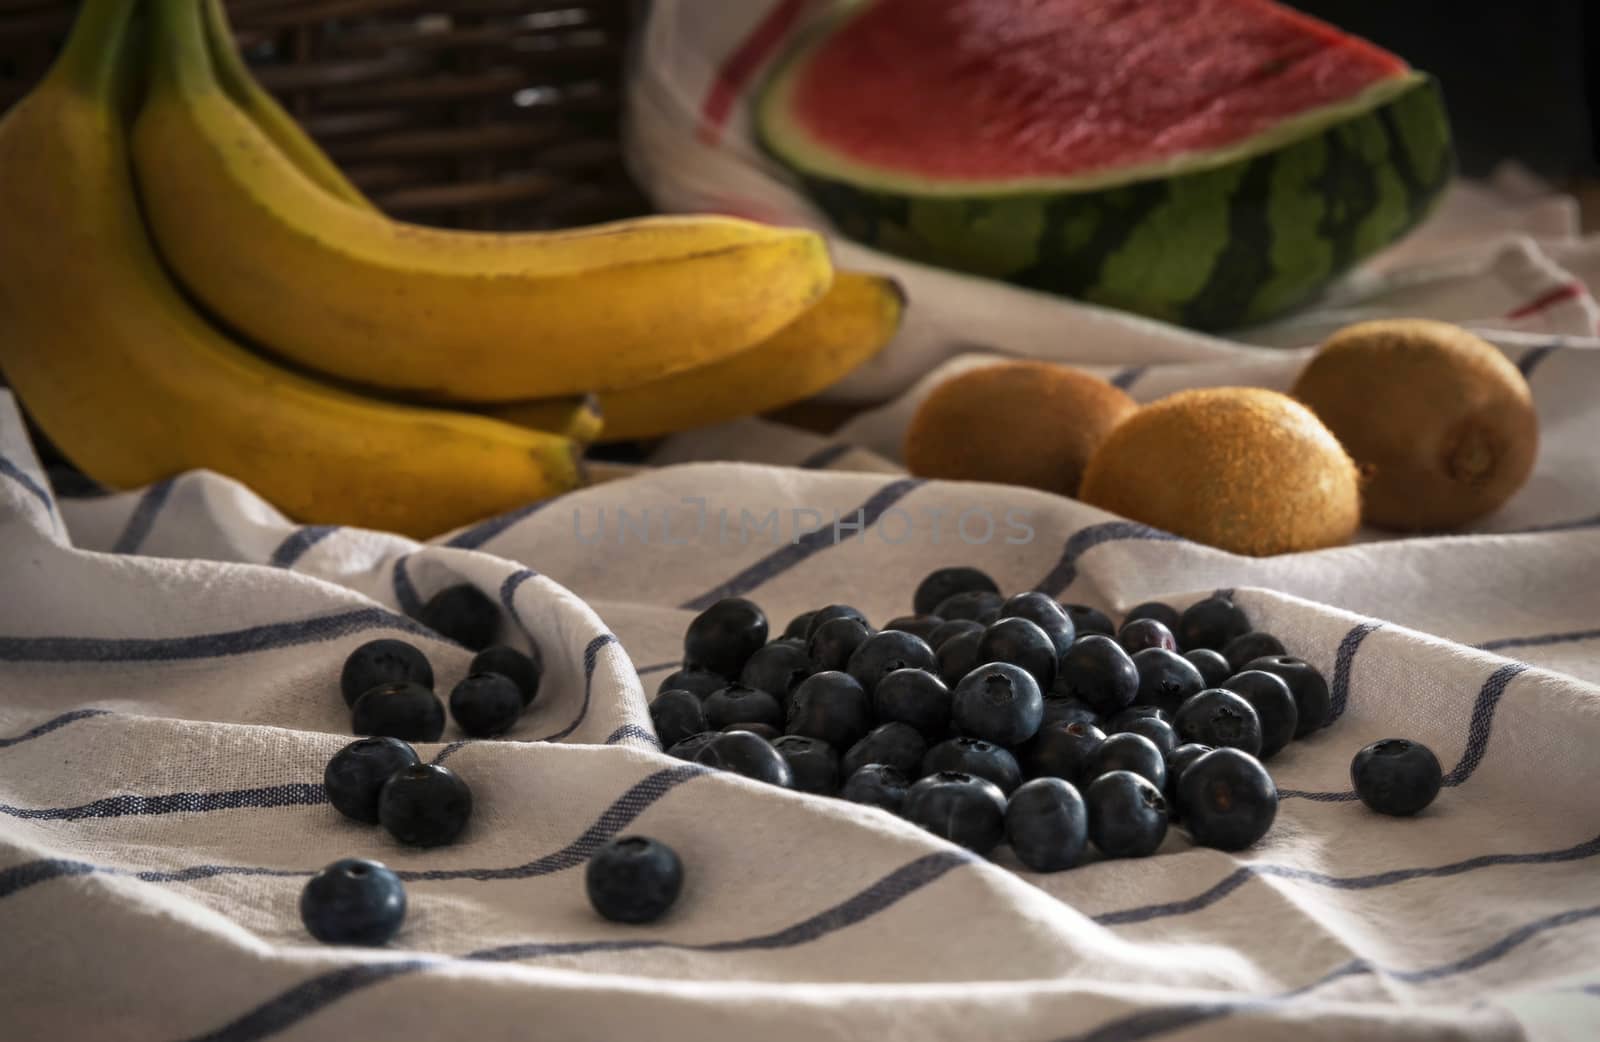 Still-life with fruits on a white tablecloth with blue lines. Blueberries, kiwis, bananas and watermelon.